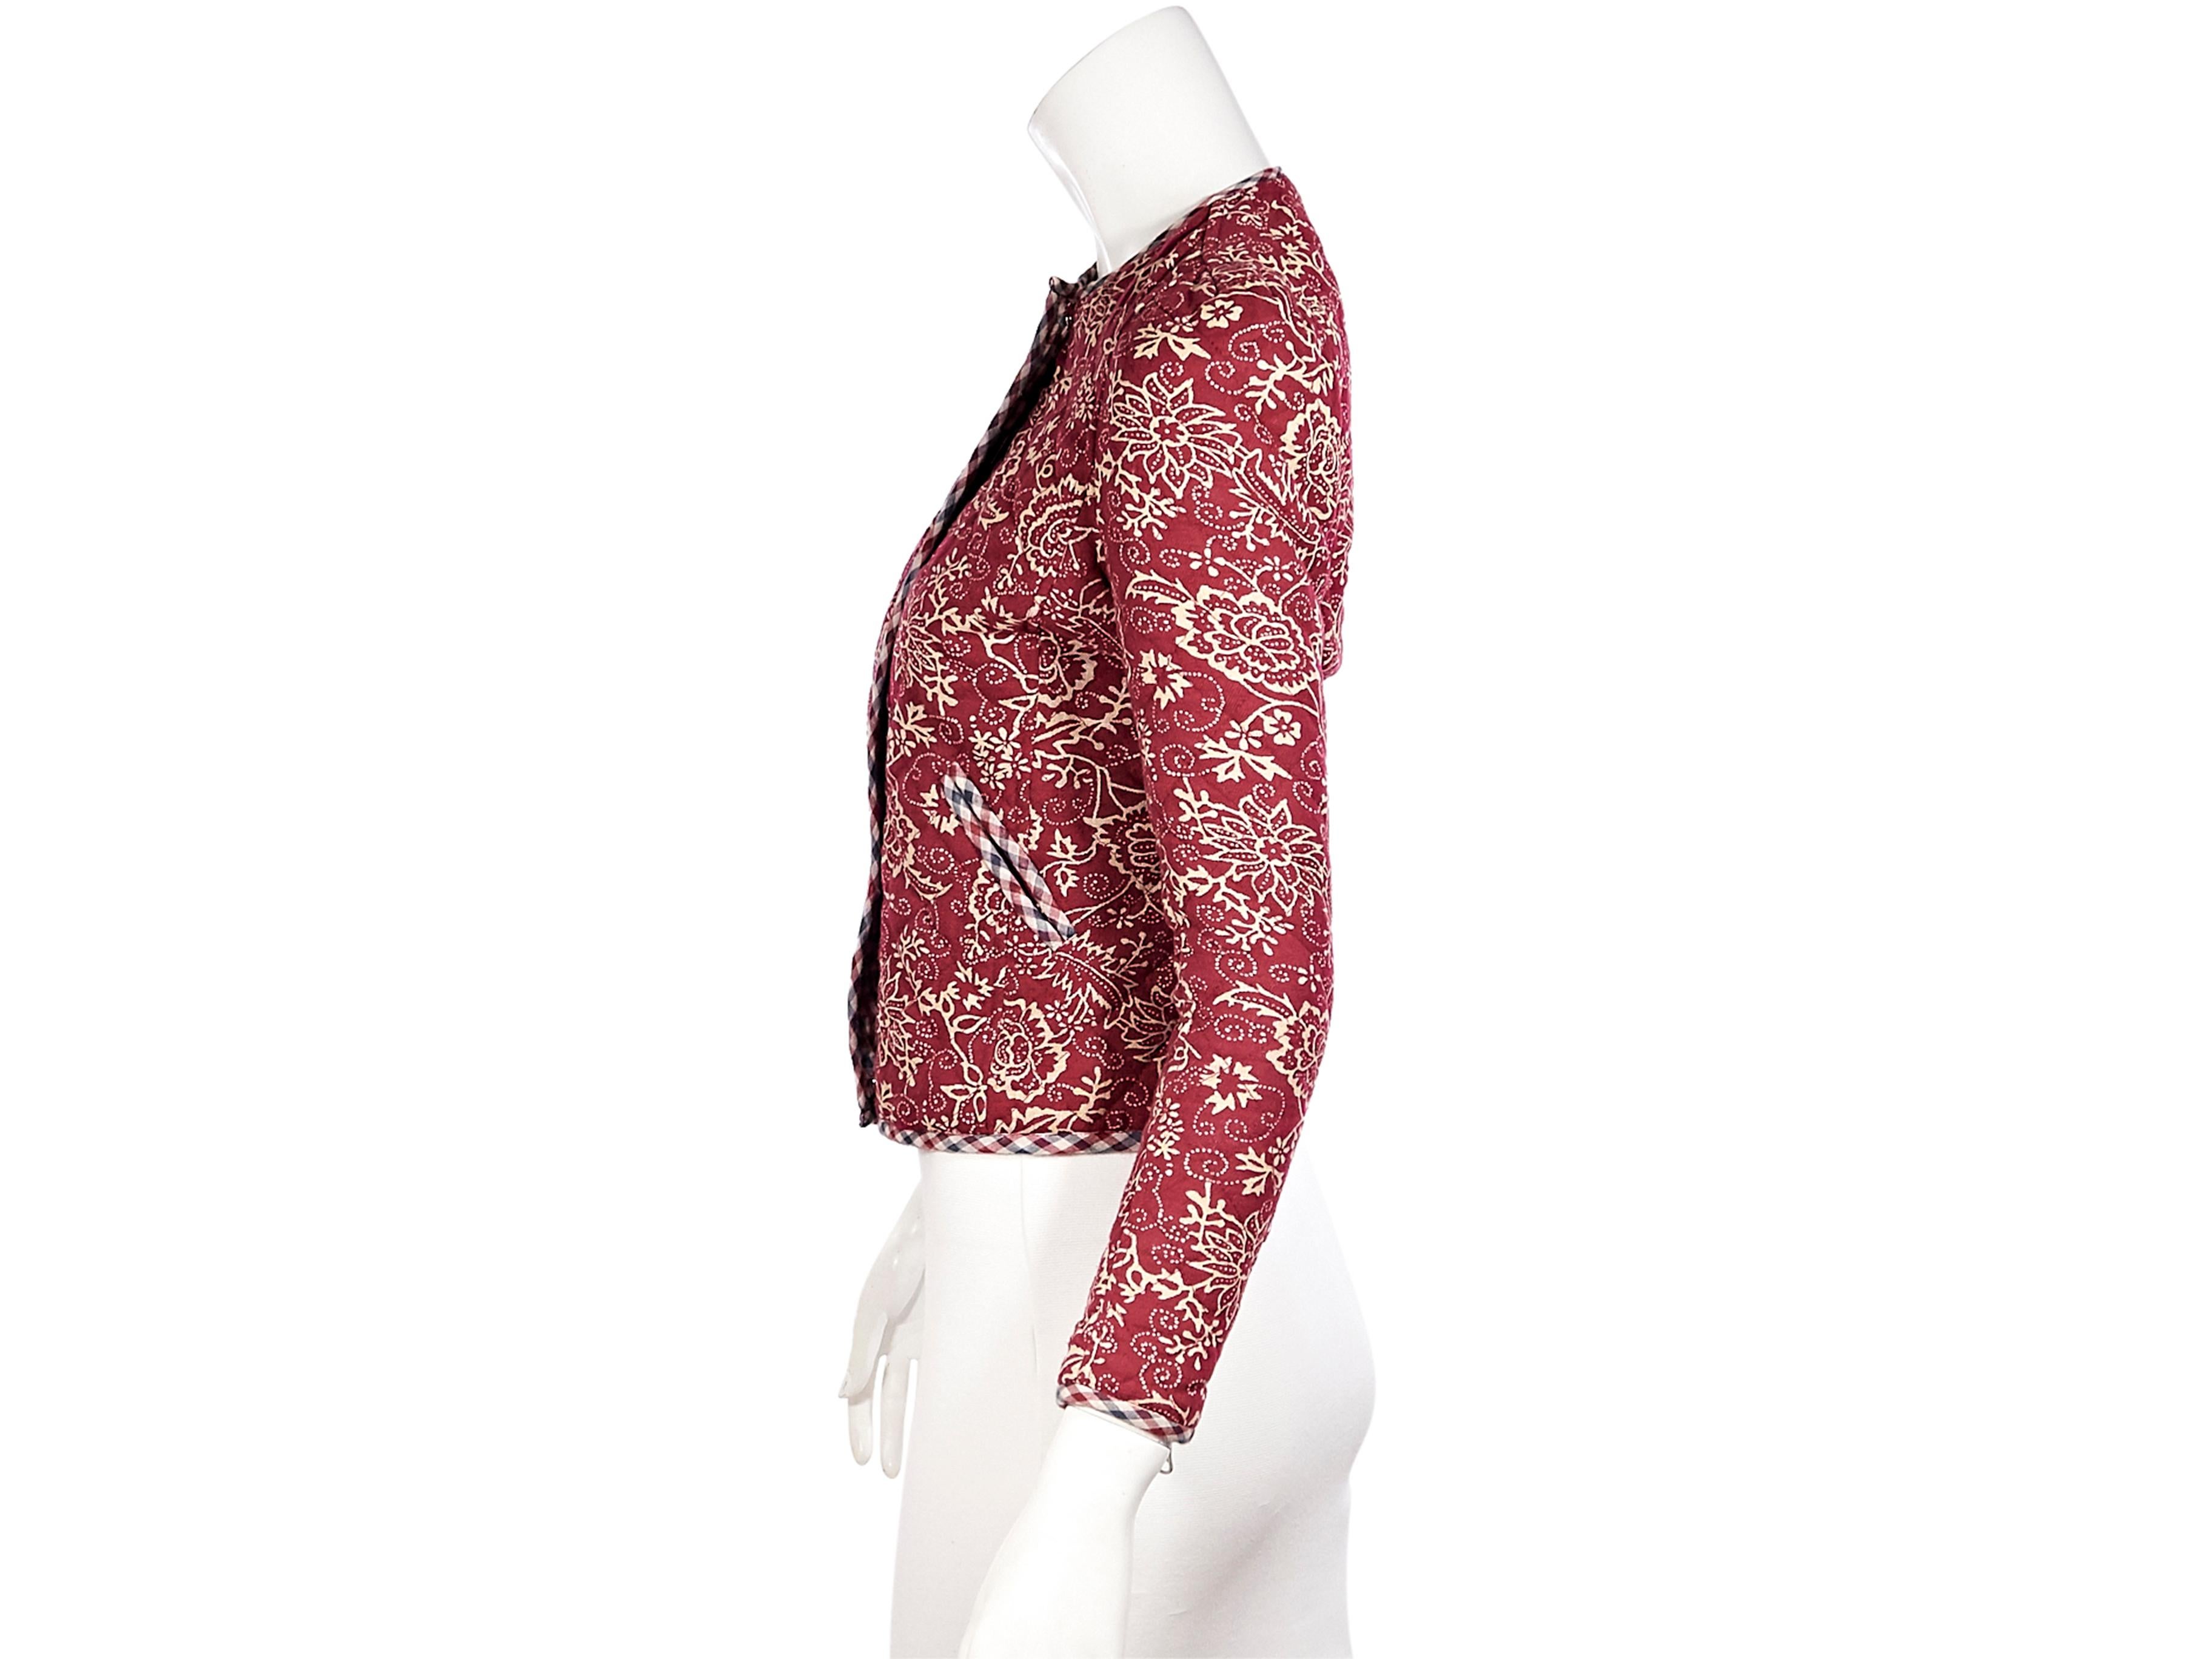 Product details:  Red floral quilted cotton jacket by Isabel Marant Etoile.  Features plaid trim.  Crewneck.  Long sleeves.  Concealed zip-front closure.  Waist slide pockets.  32